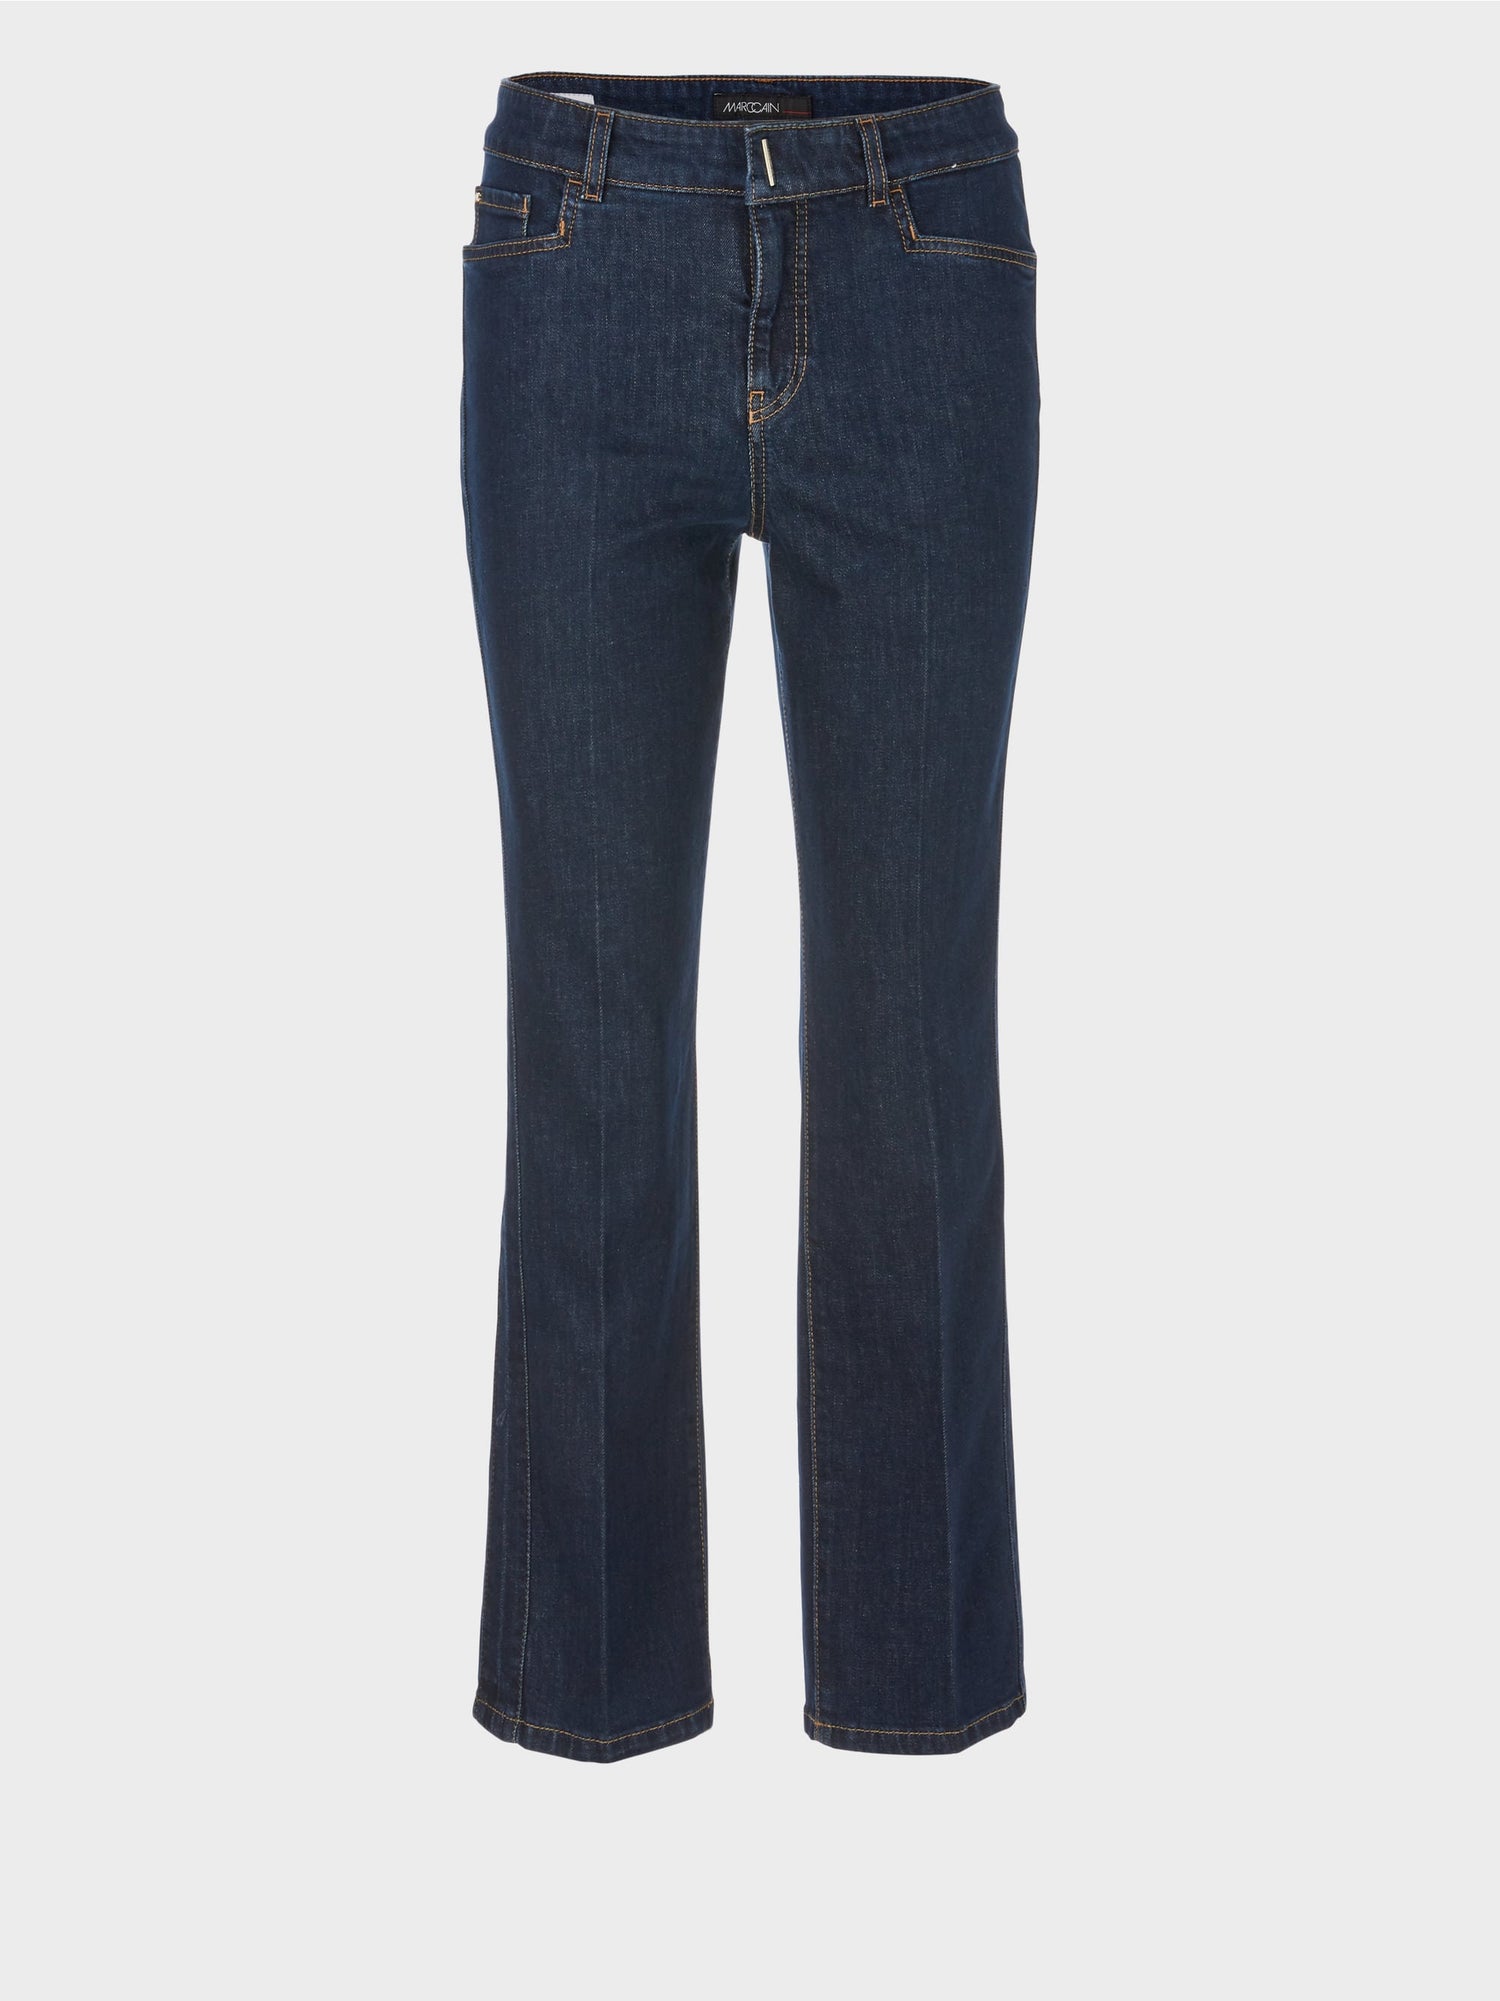 Faro &quot;Rethink Together&quot; Jeans_VC 82.16 D52_357_05